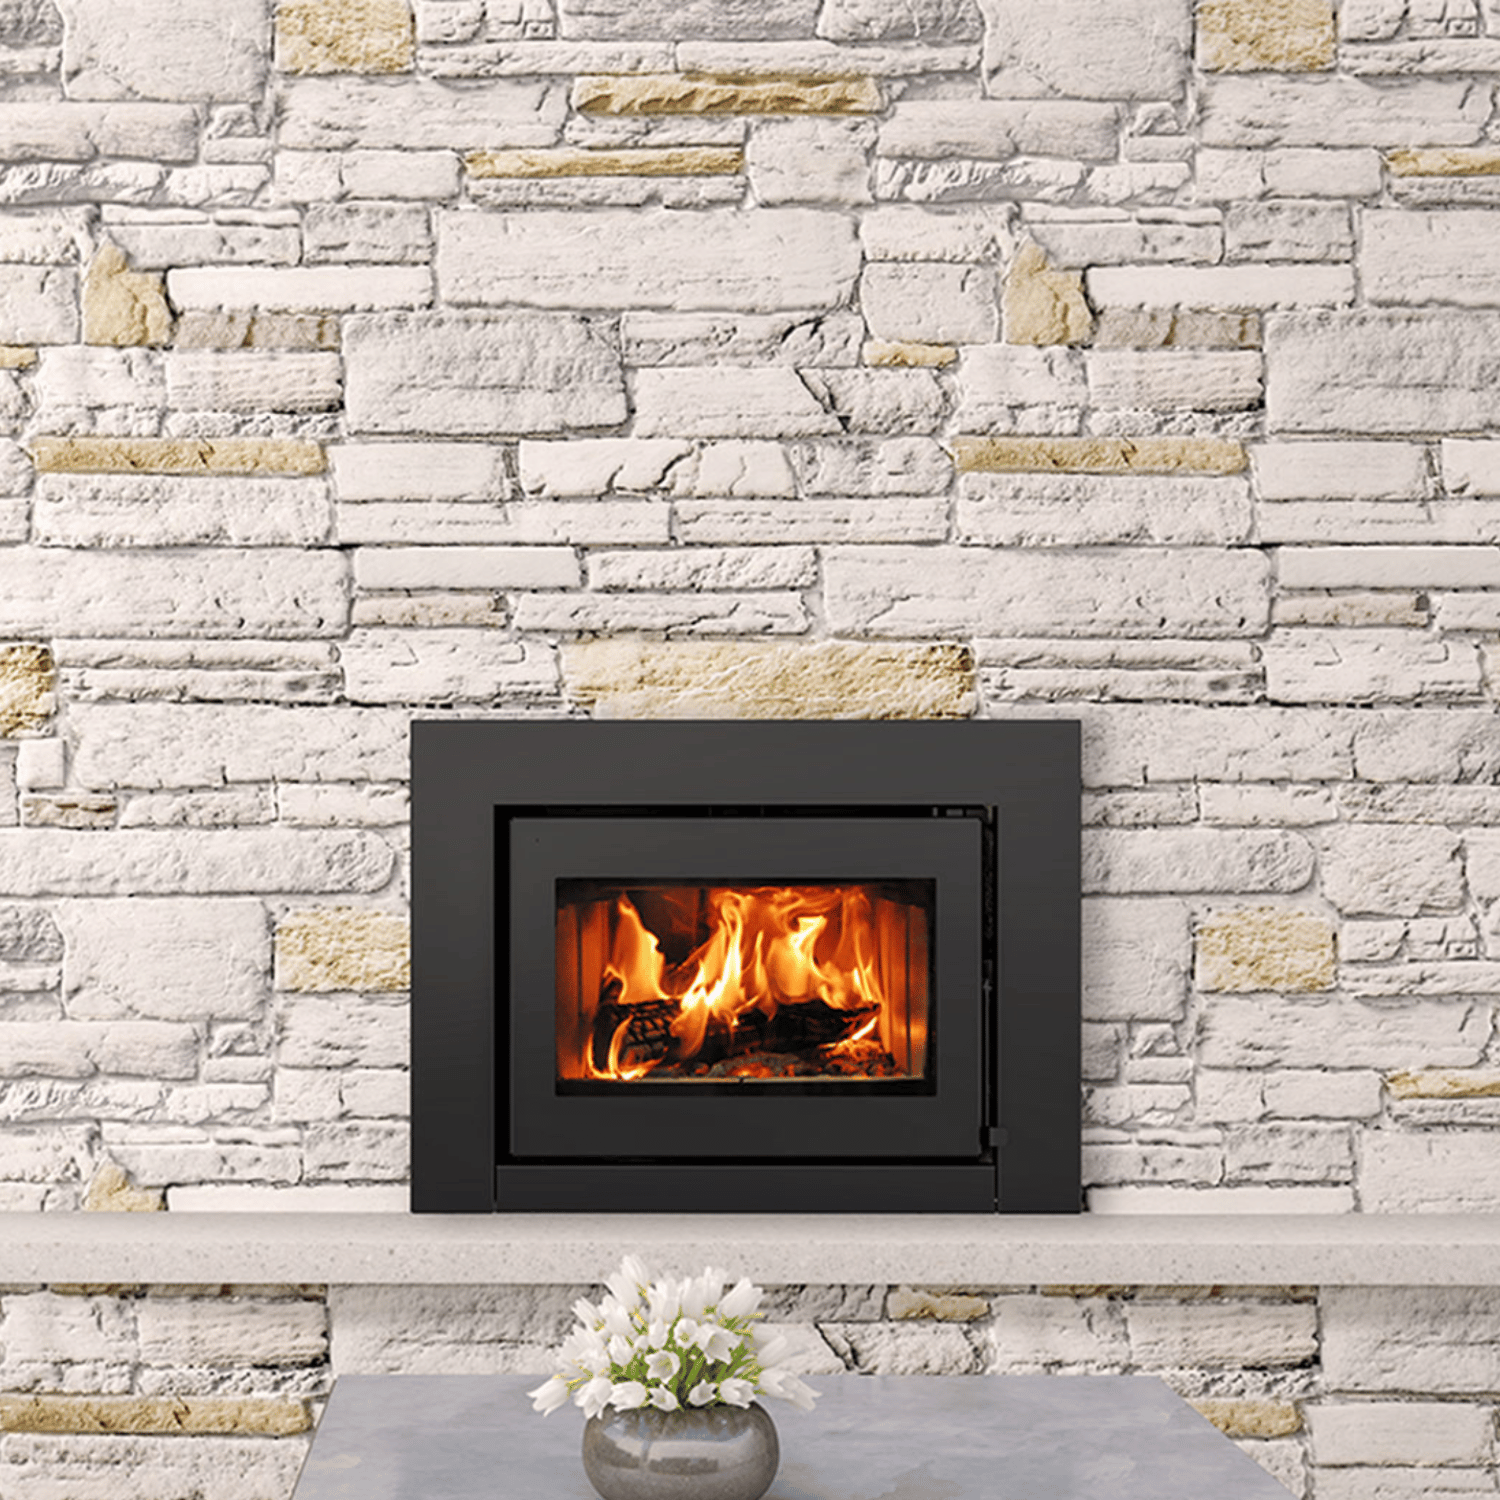 Fireplace insert Focus 3600i – RSF